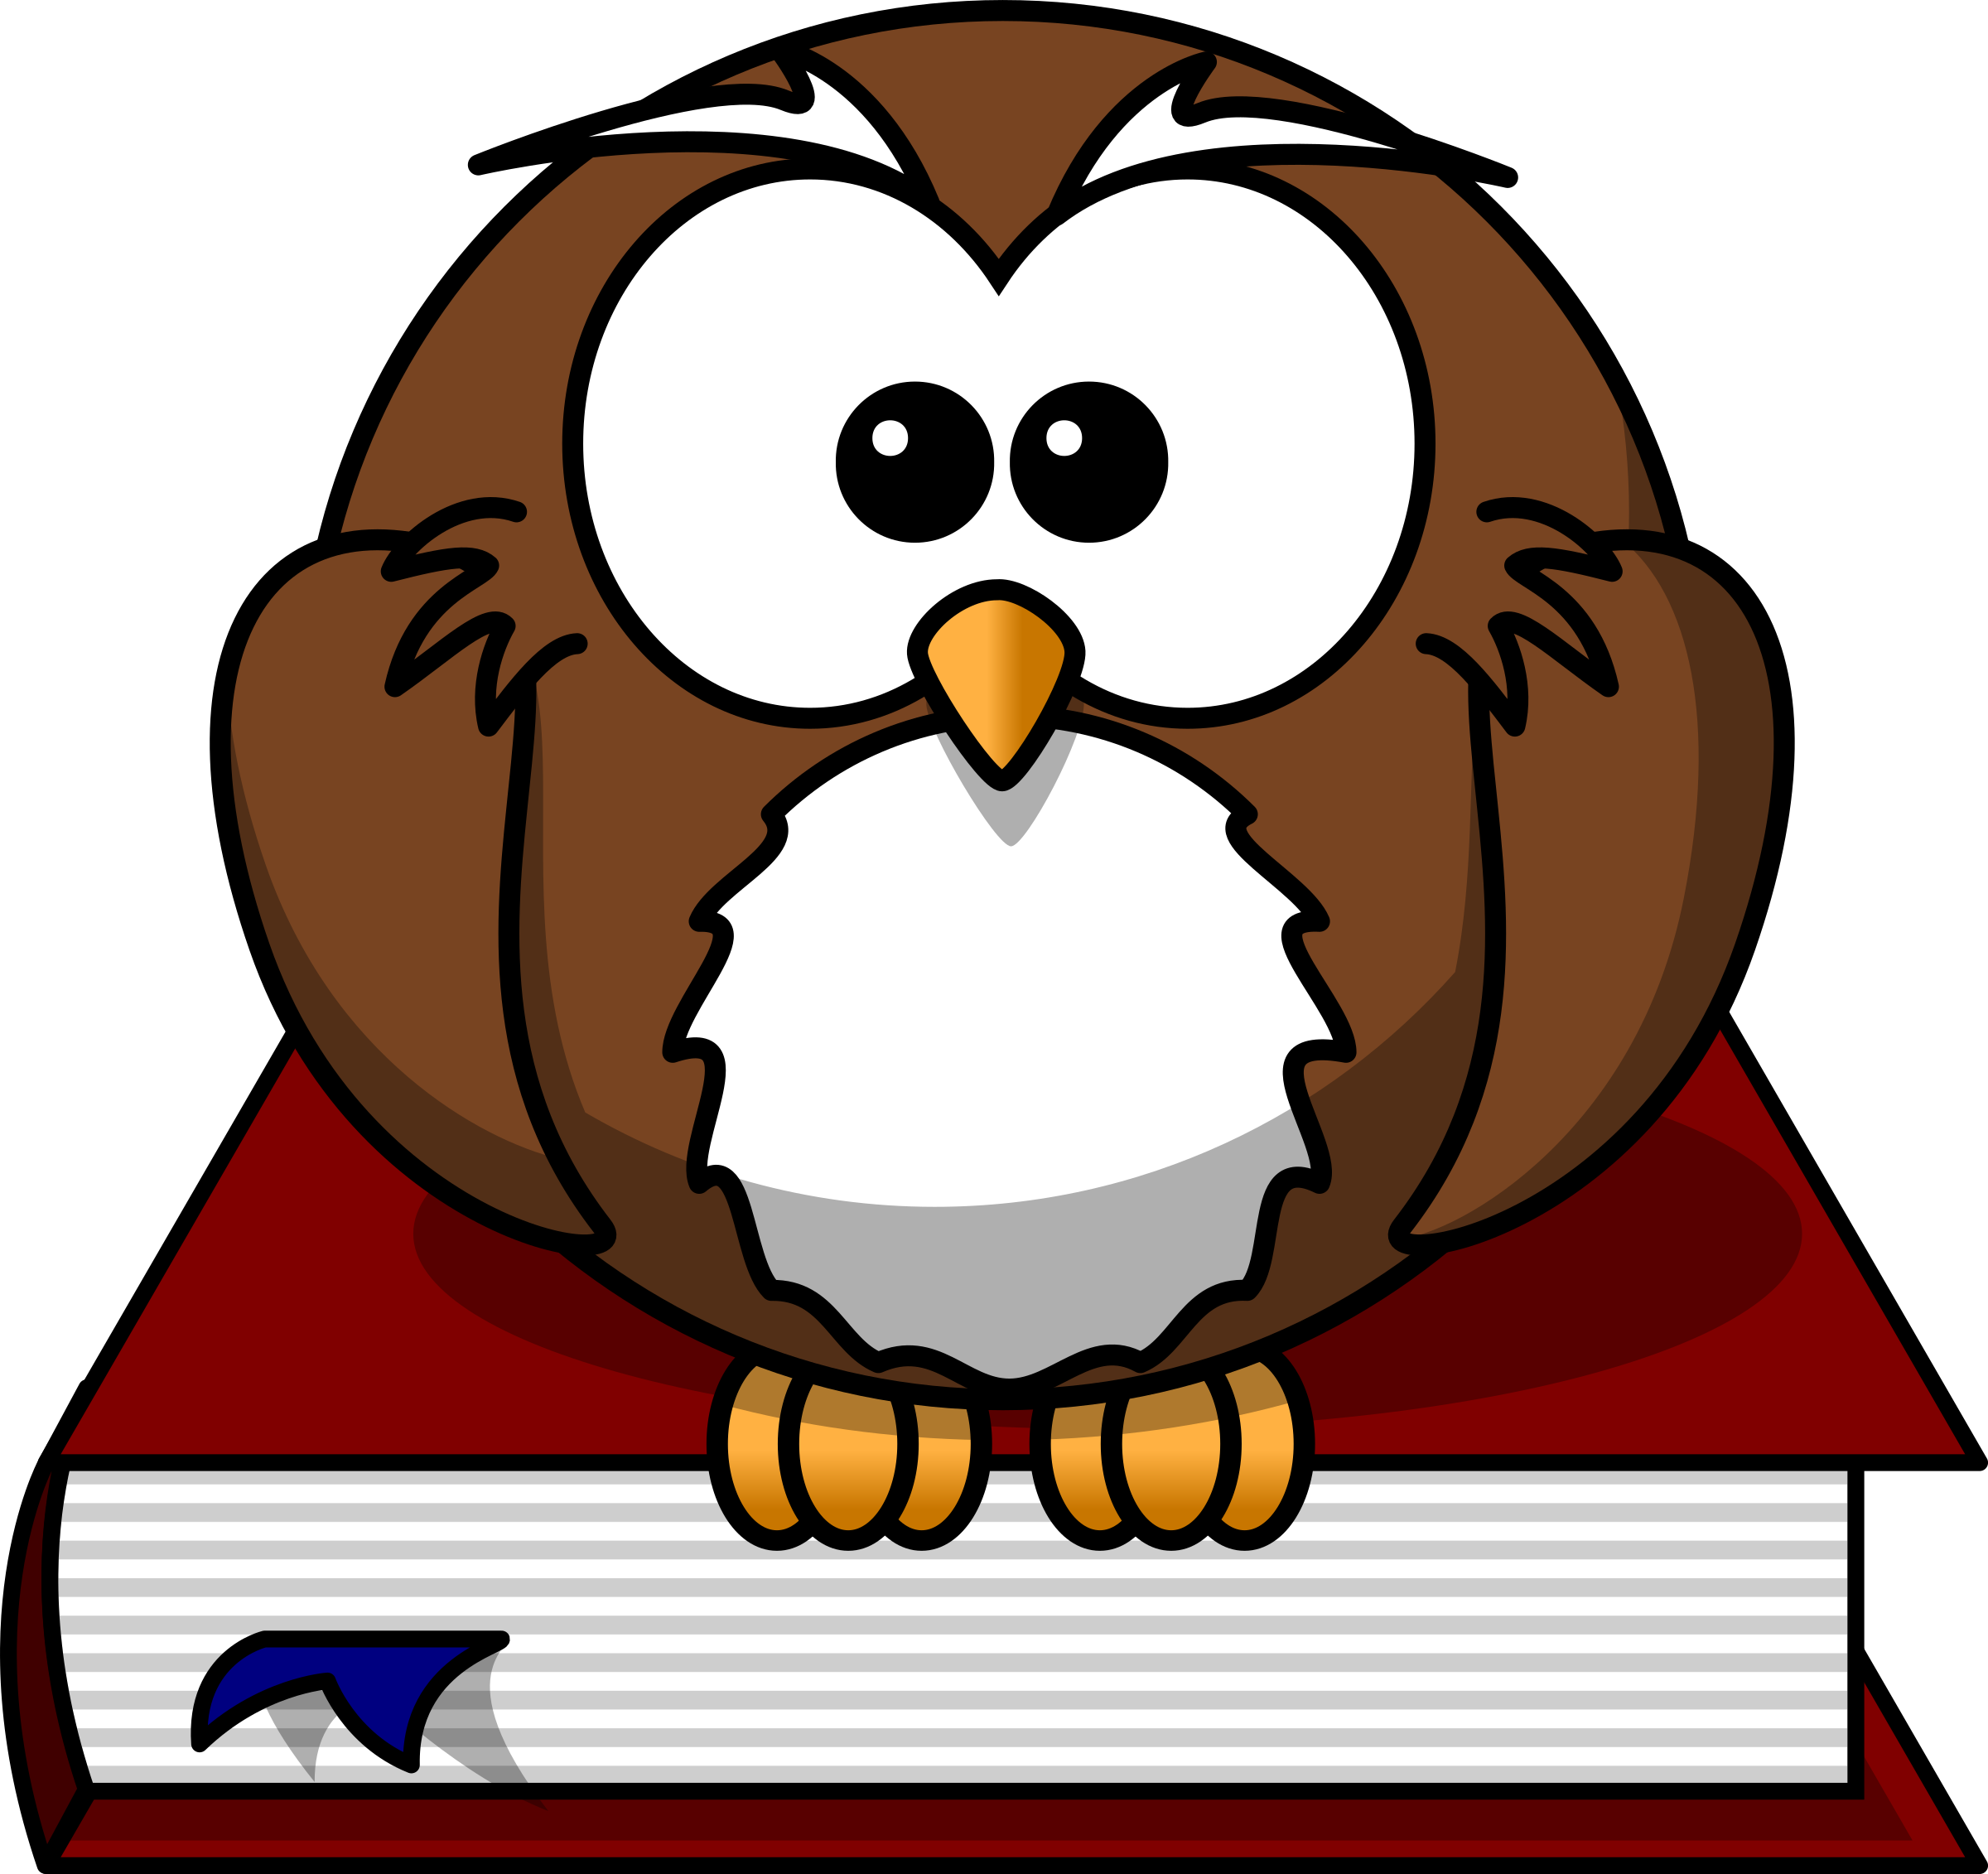 Cartoon owl sitting on a book Icons PNG - Free PNG and Icons Downloads